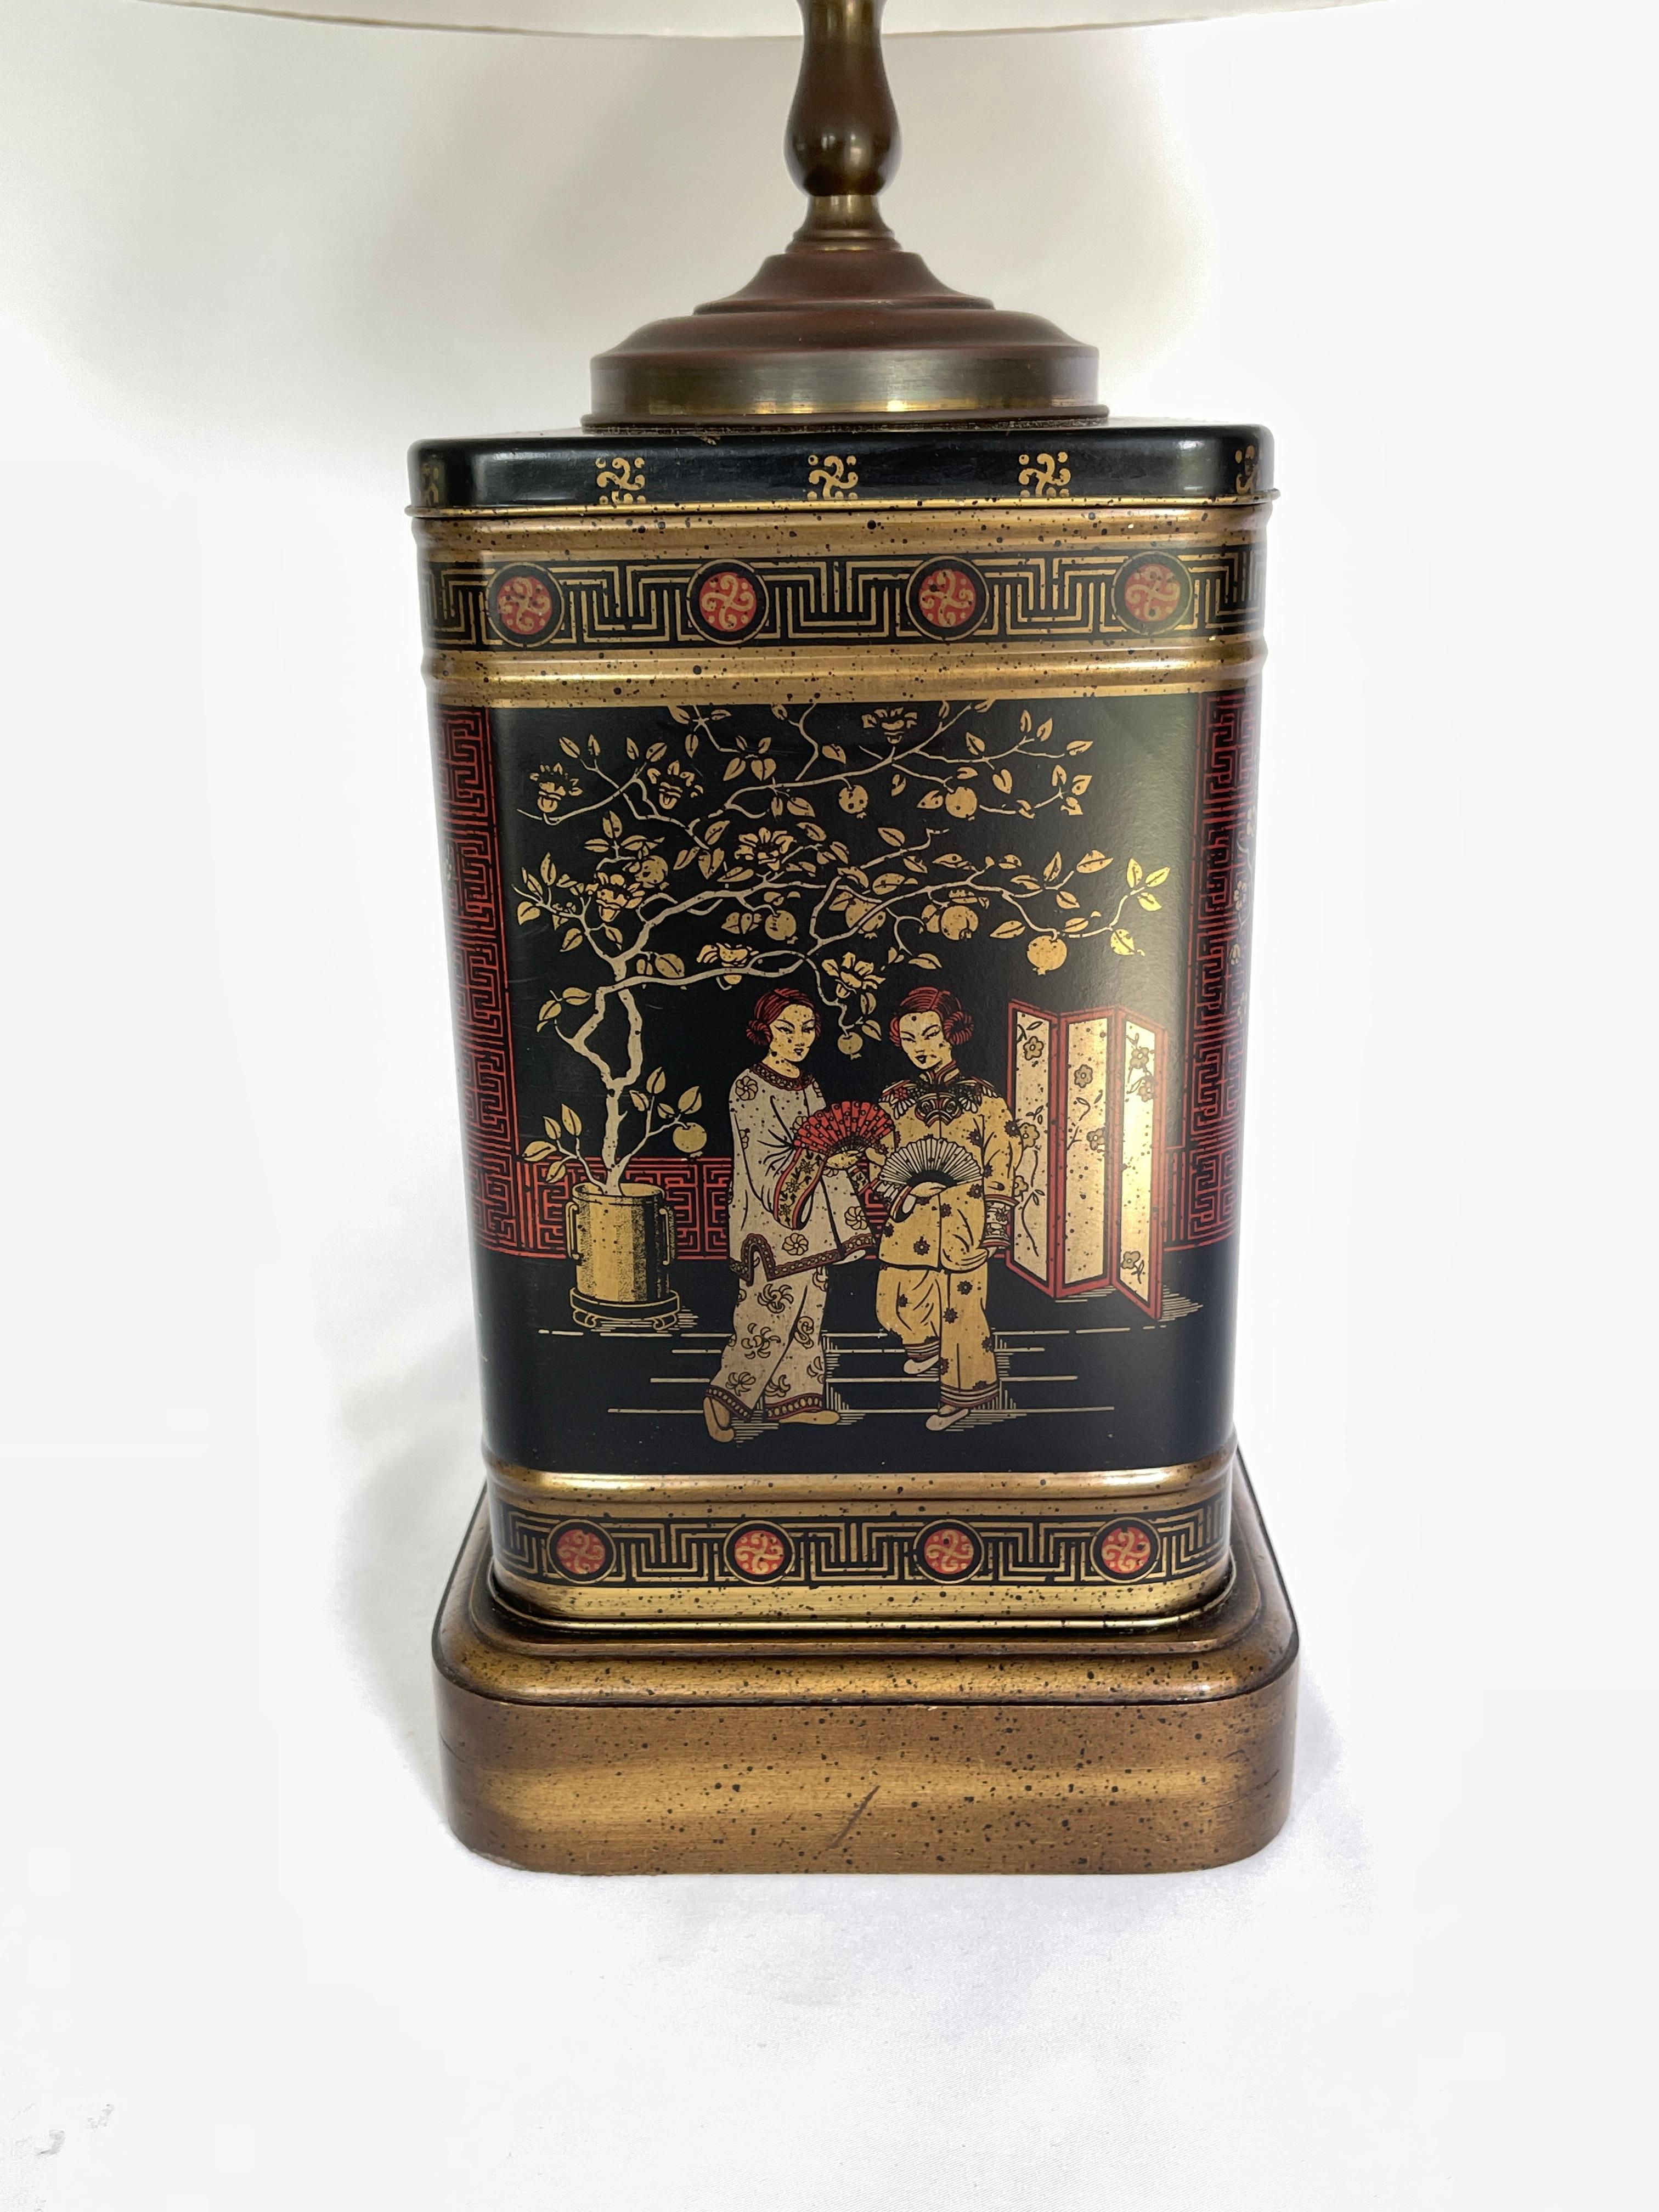 Vintage Chinese Export Chinoiserie tea canister by Wildwood Lamp Co.,
 USA c. 1960's. Lamp has one socket, with original vintage wiring.
A wonderful international world traveler style lamp that works with many interiors.
Shade not included, was